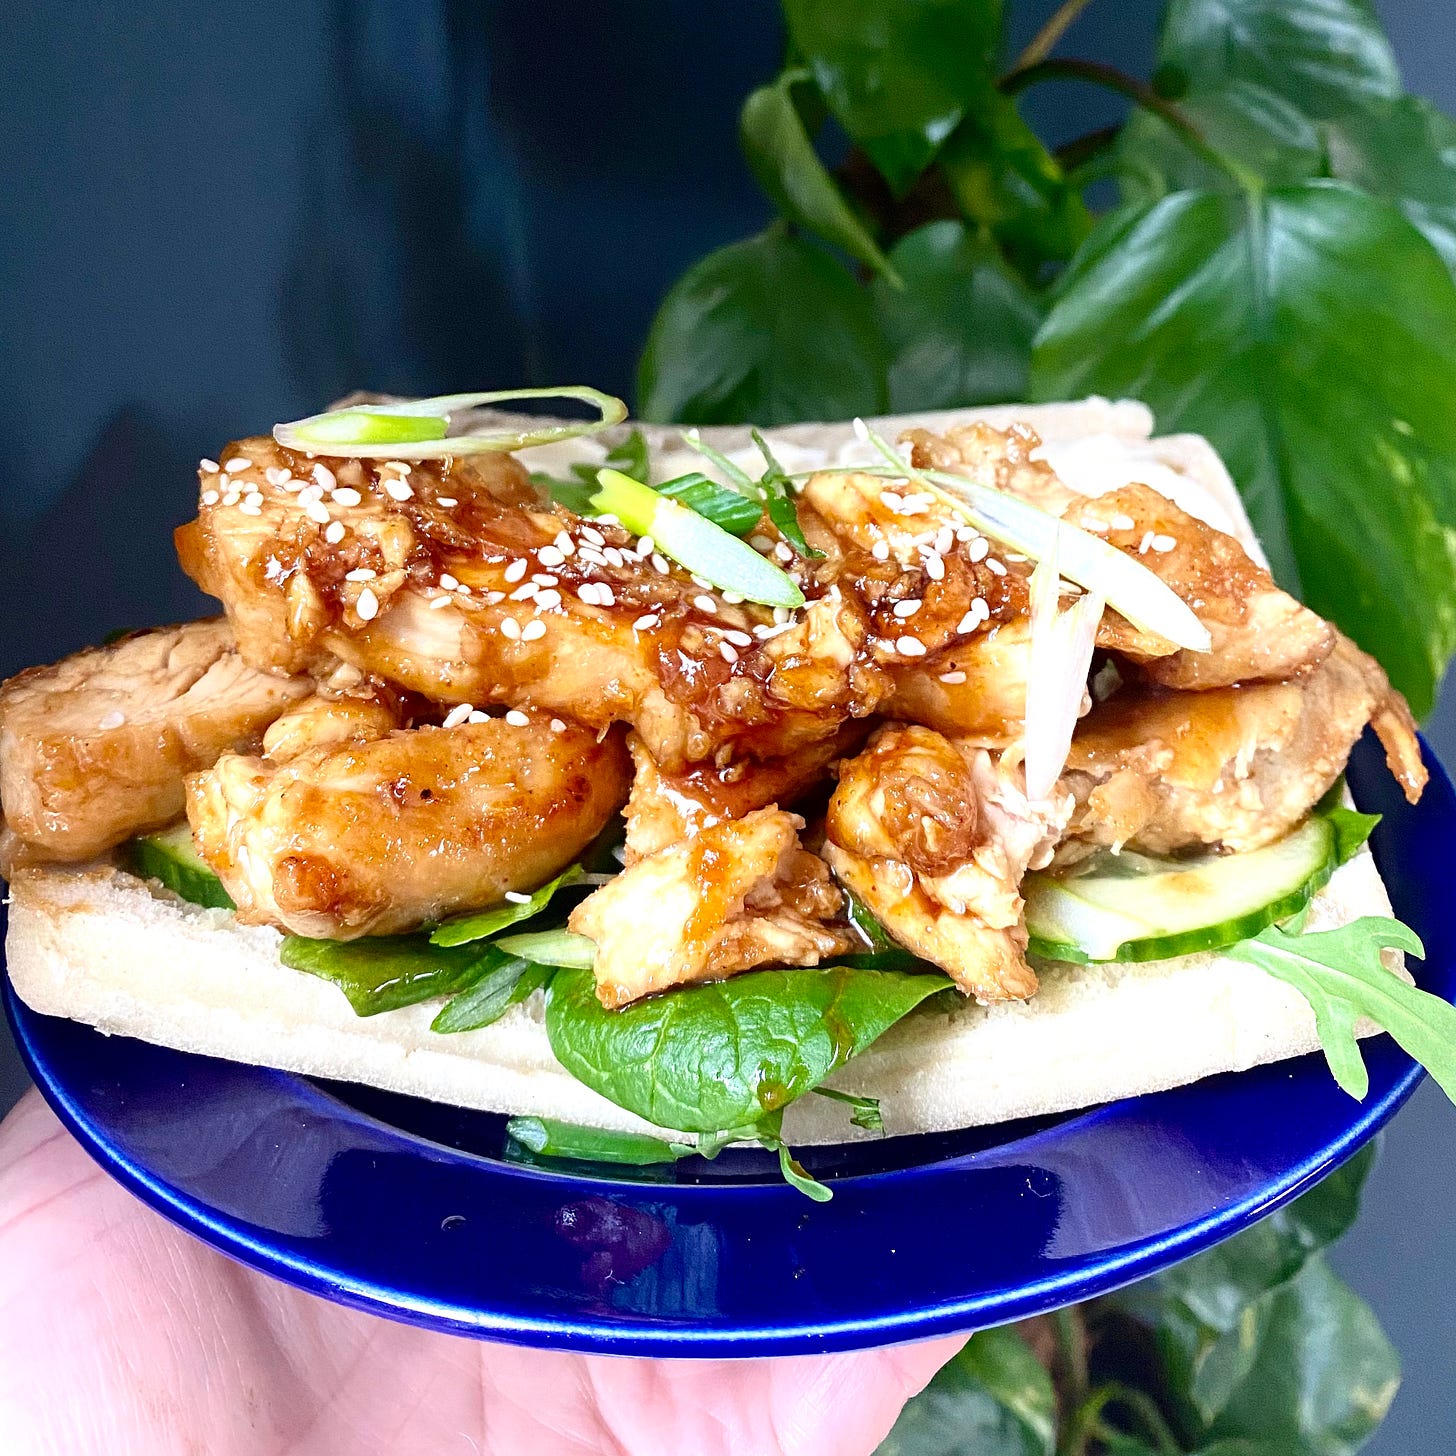 Blue plate with a sandwich on top, filled with Korean fried chicken, shredded spring onions, spinach and cucumber